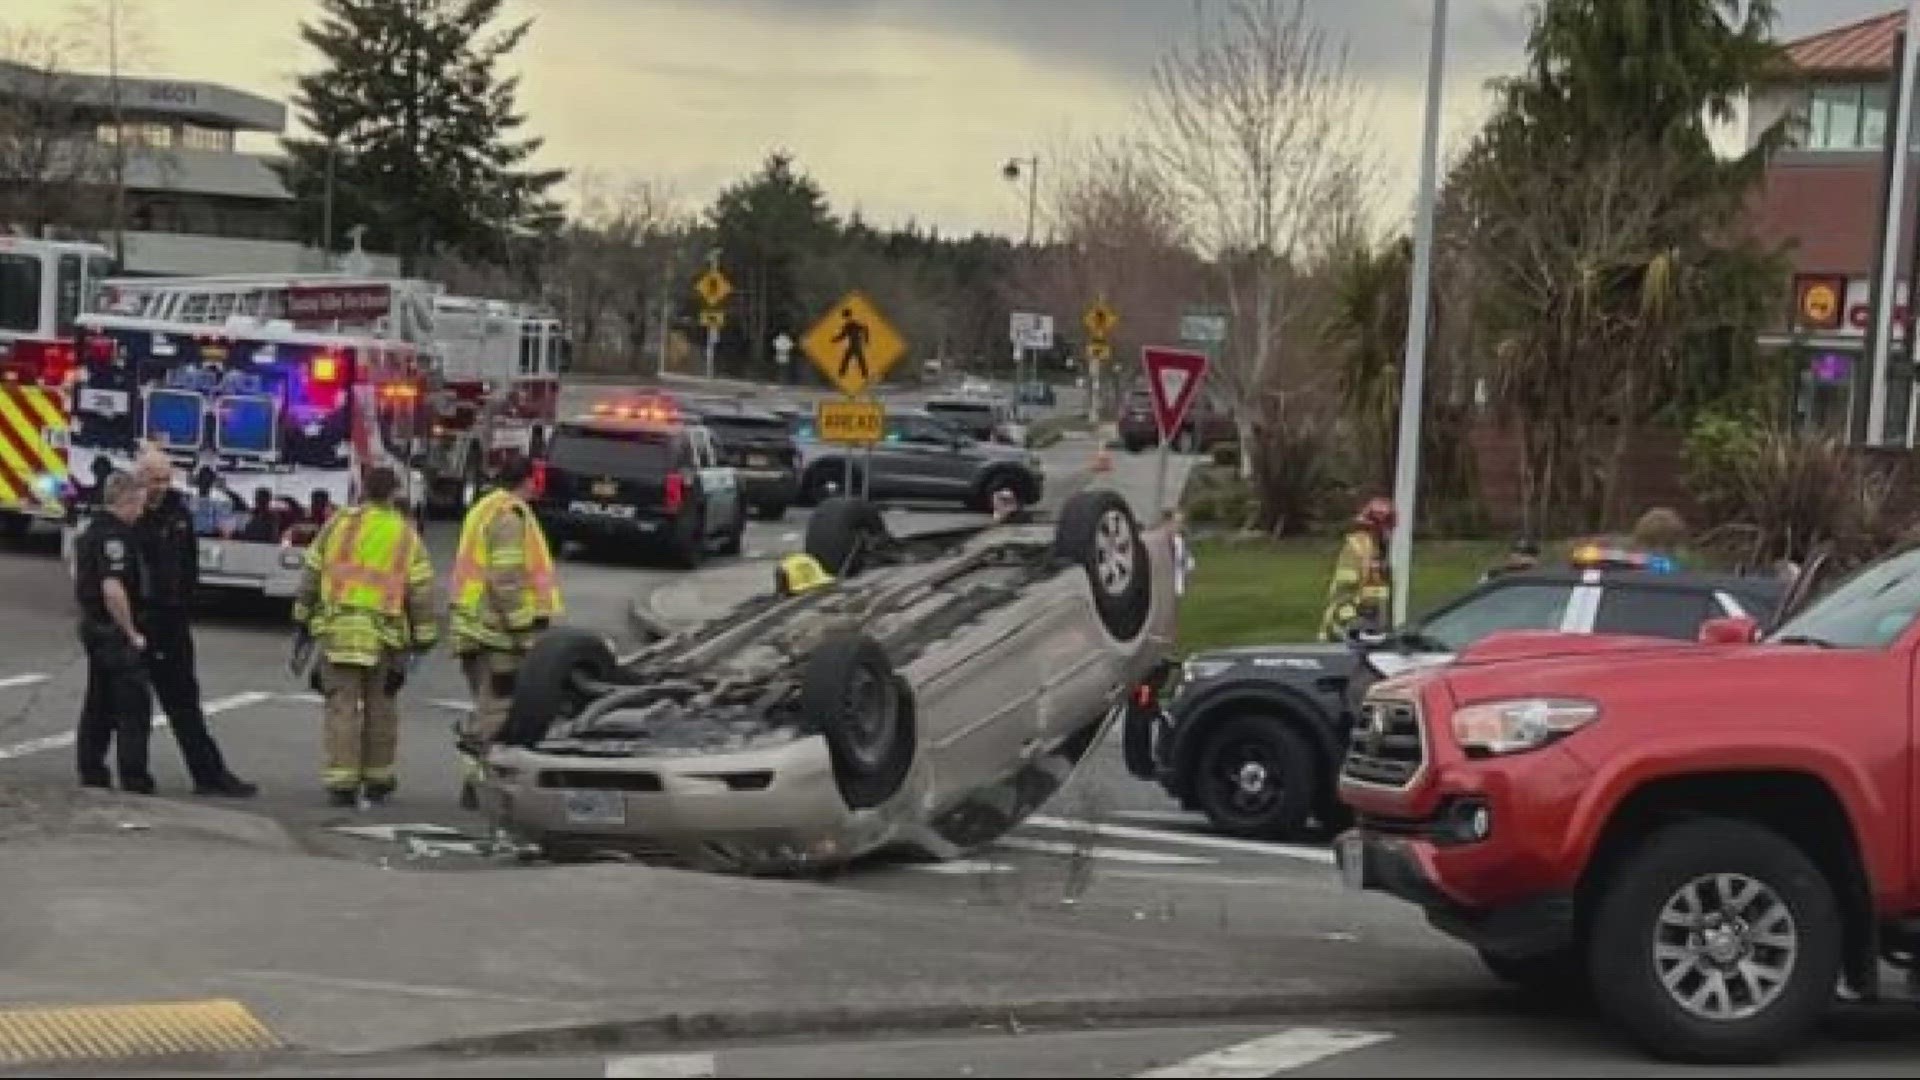 Nobody was injured in the crash in Beaverton, but one car was overturned. Two teenagers who were passing by helped pull a baby out of the backseat.